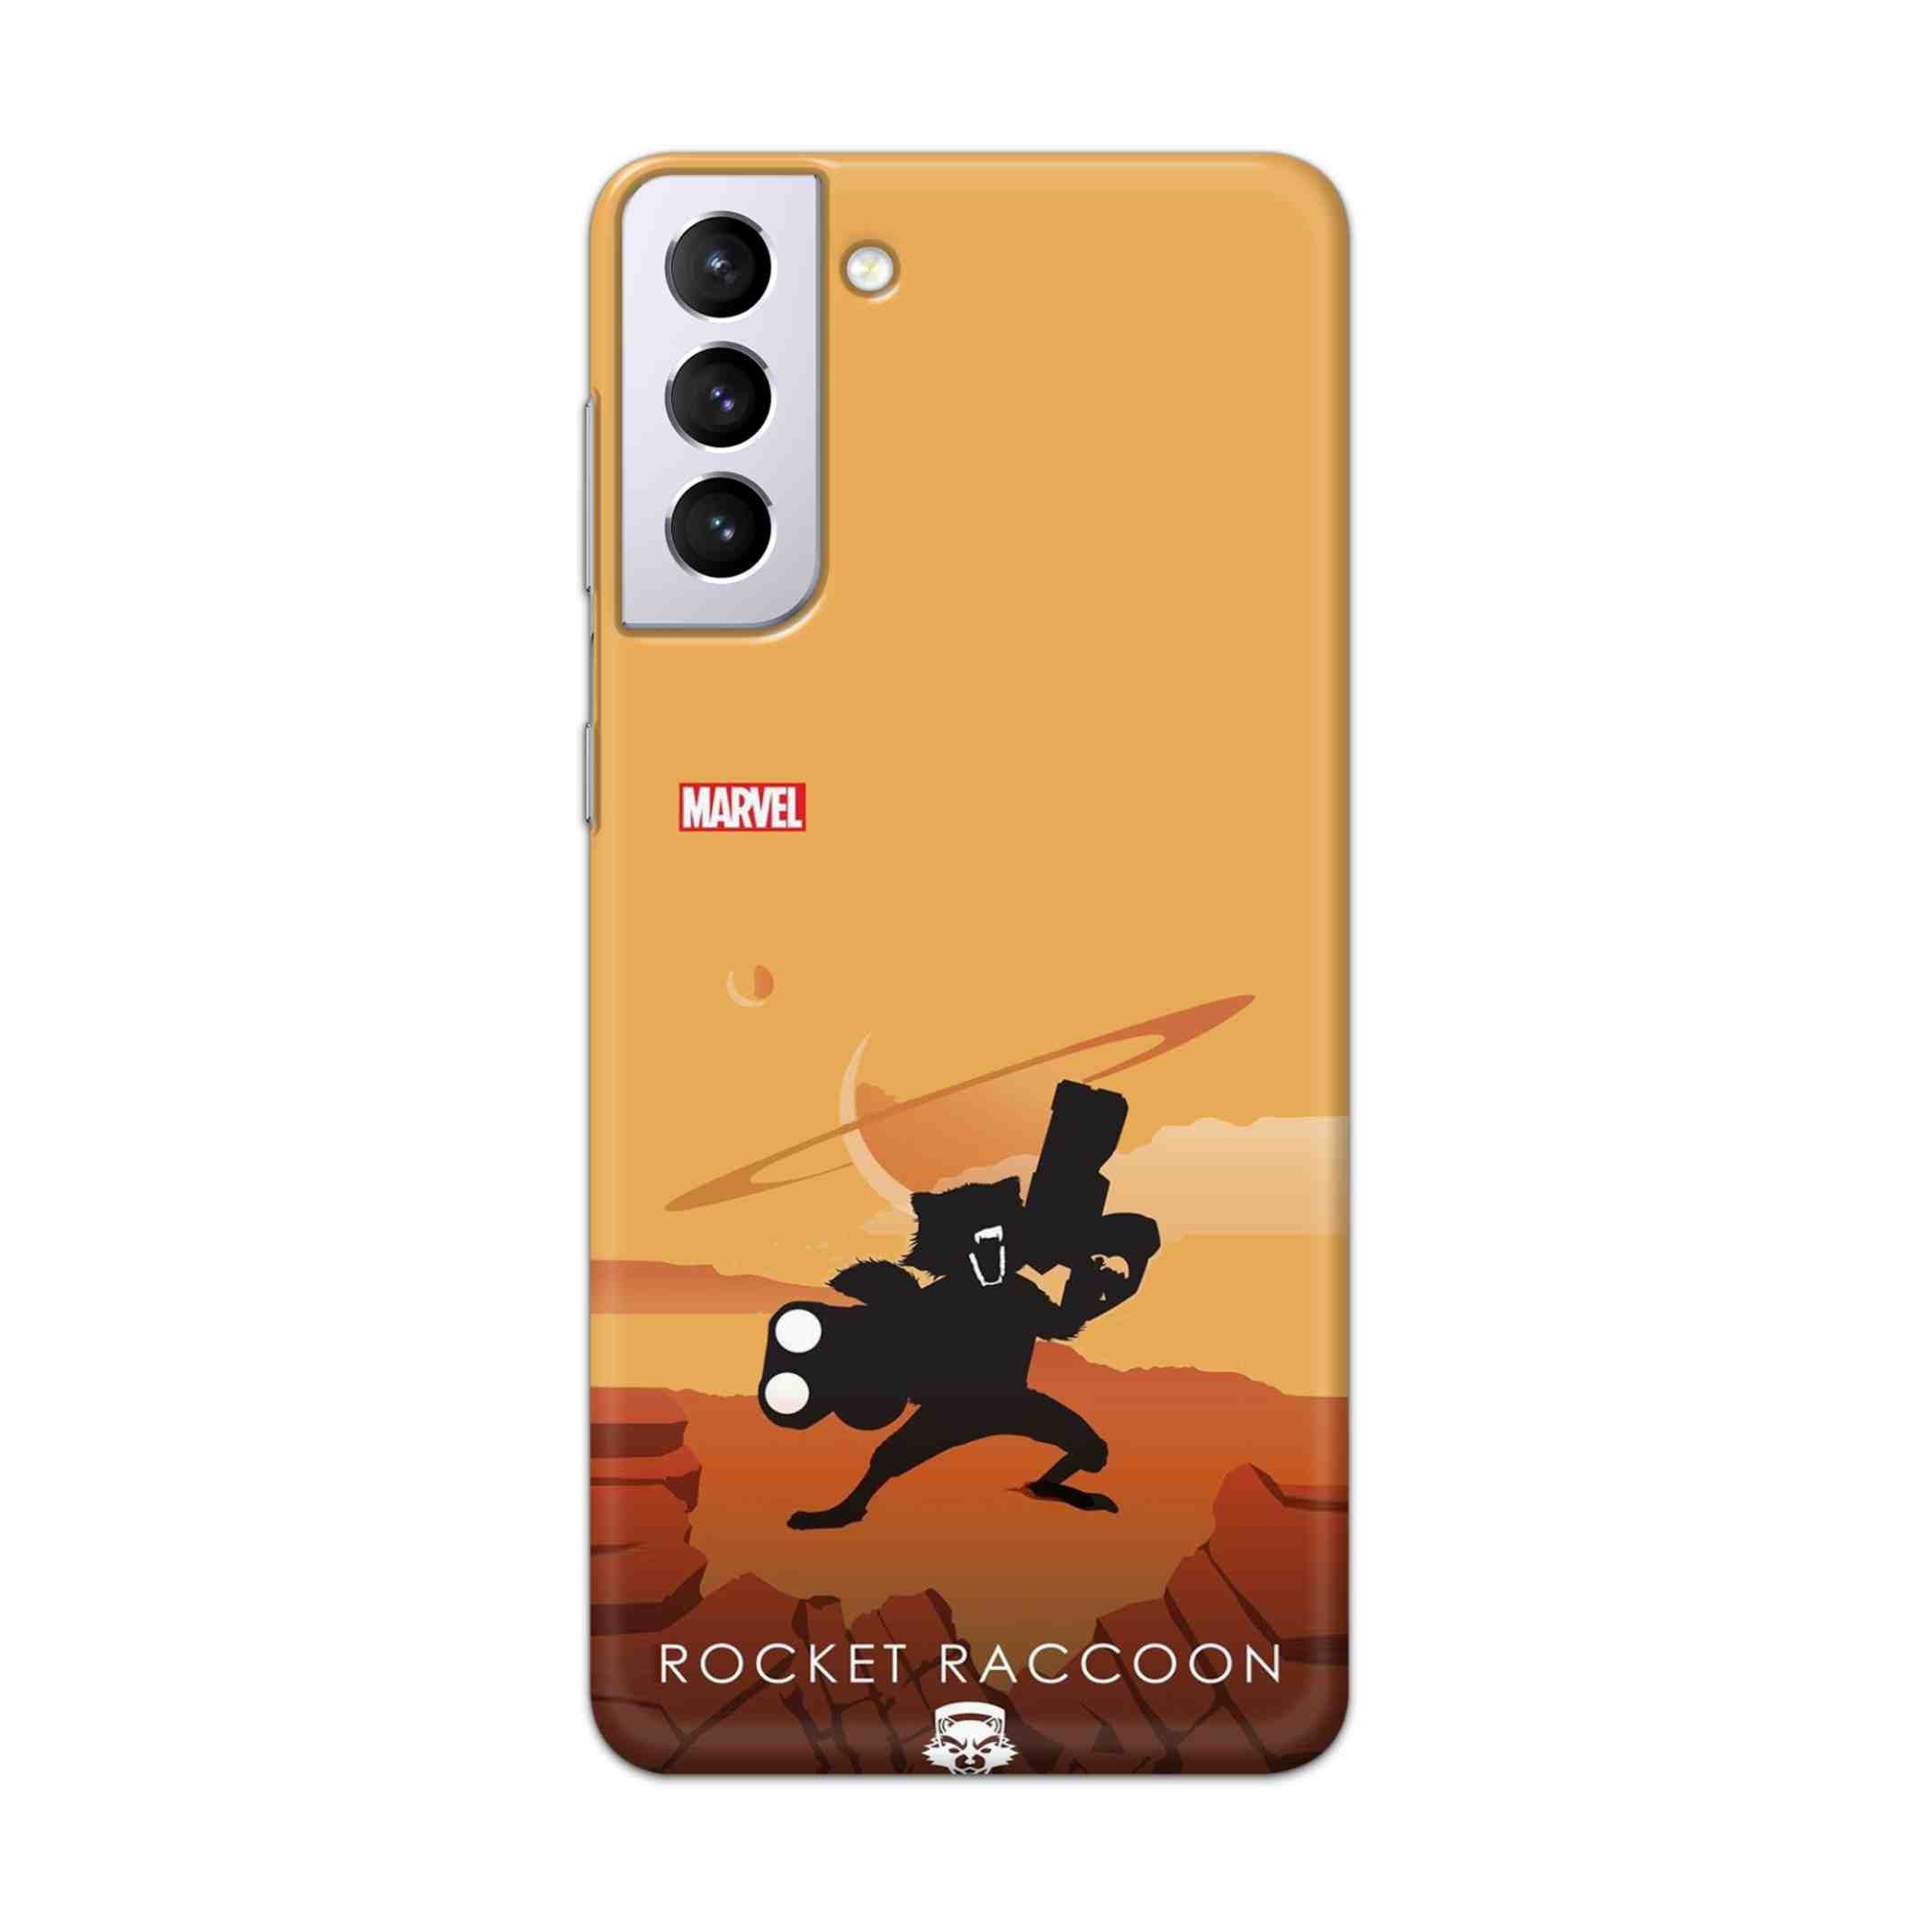 Buy Rocket Raccoon Hard Back Mobile Phone Case Cover For Samsung Galaxy S21 Plus Online